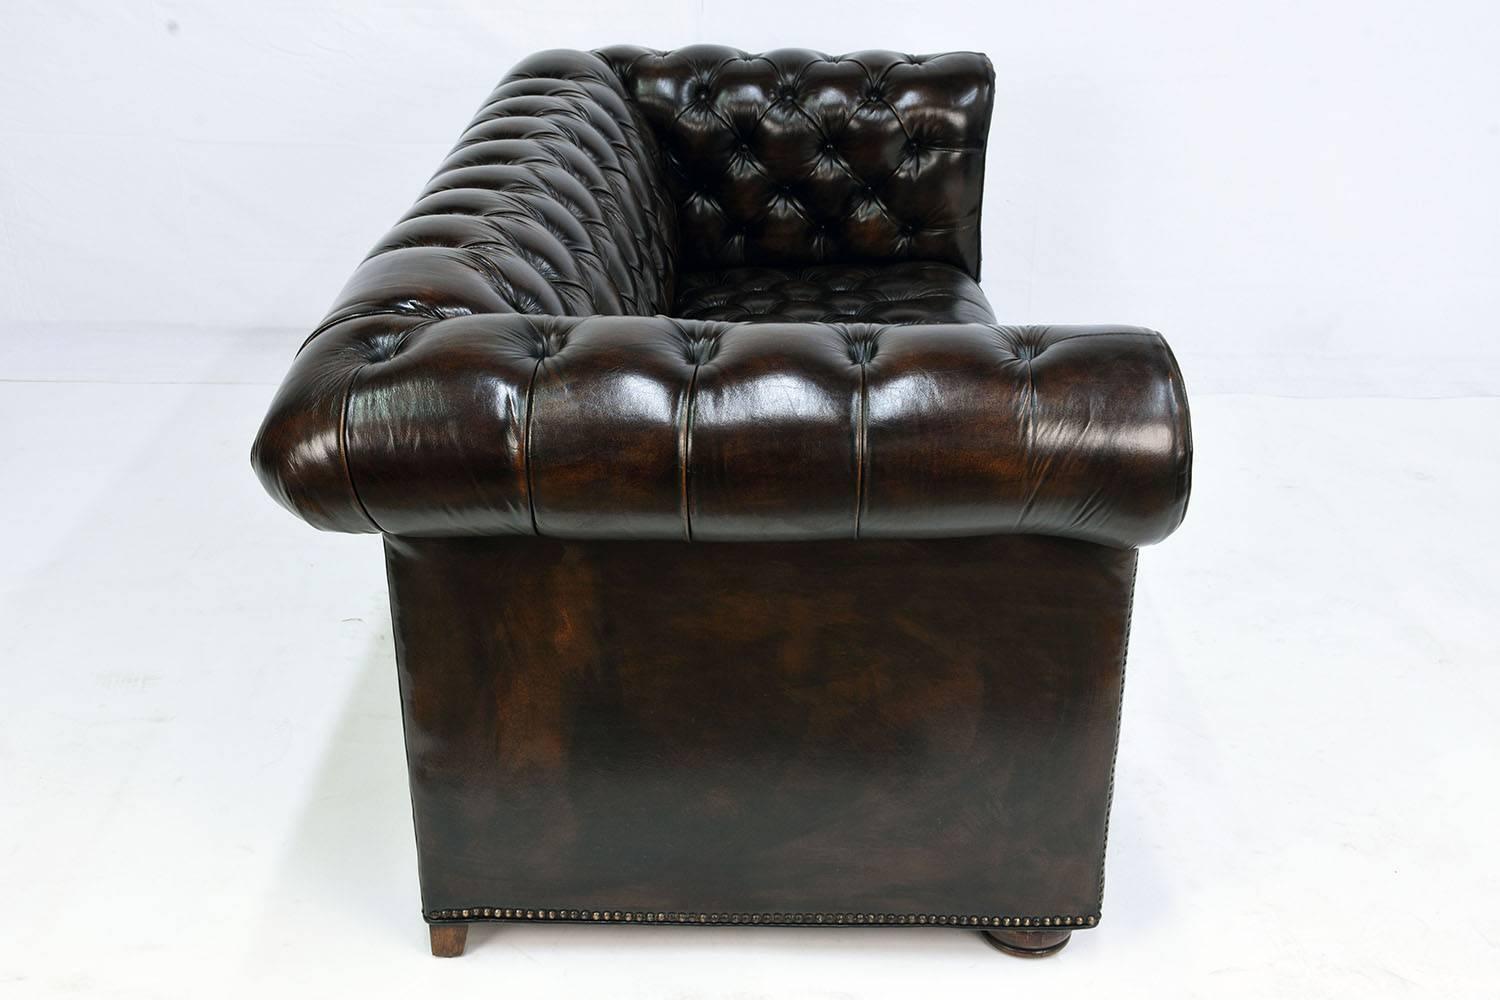 Dyed Leather Chesterfield Tufted Sofa or Loveseat